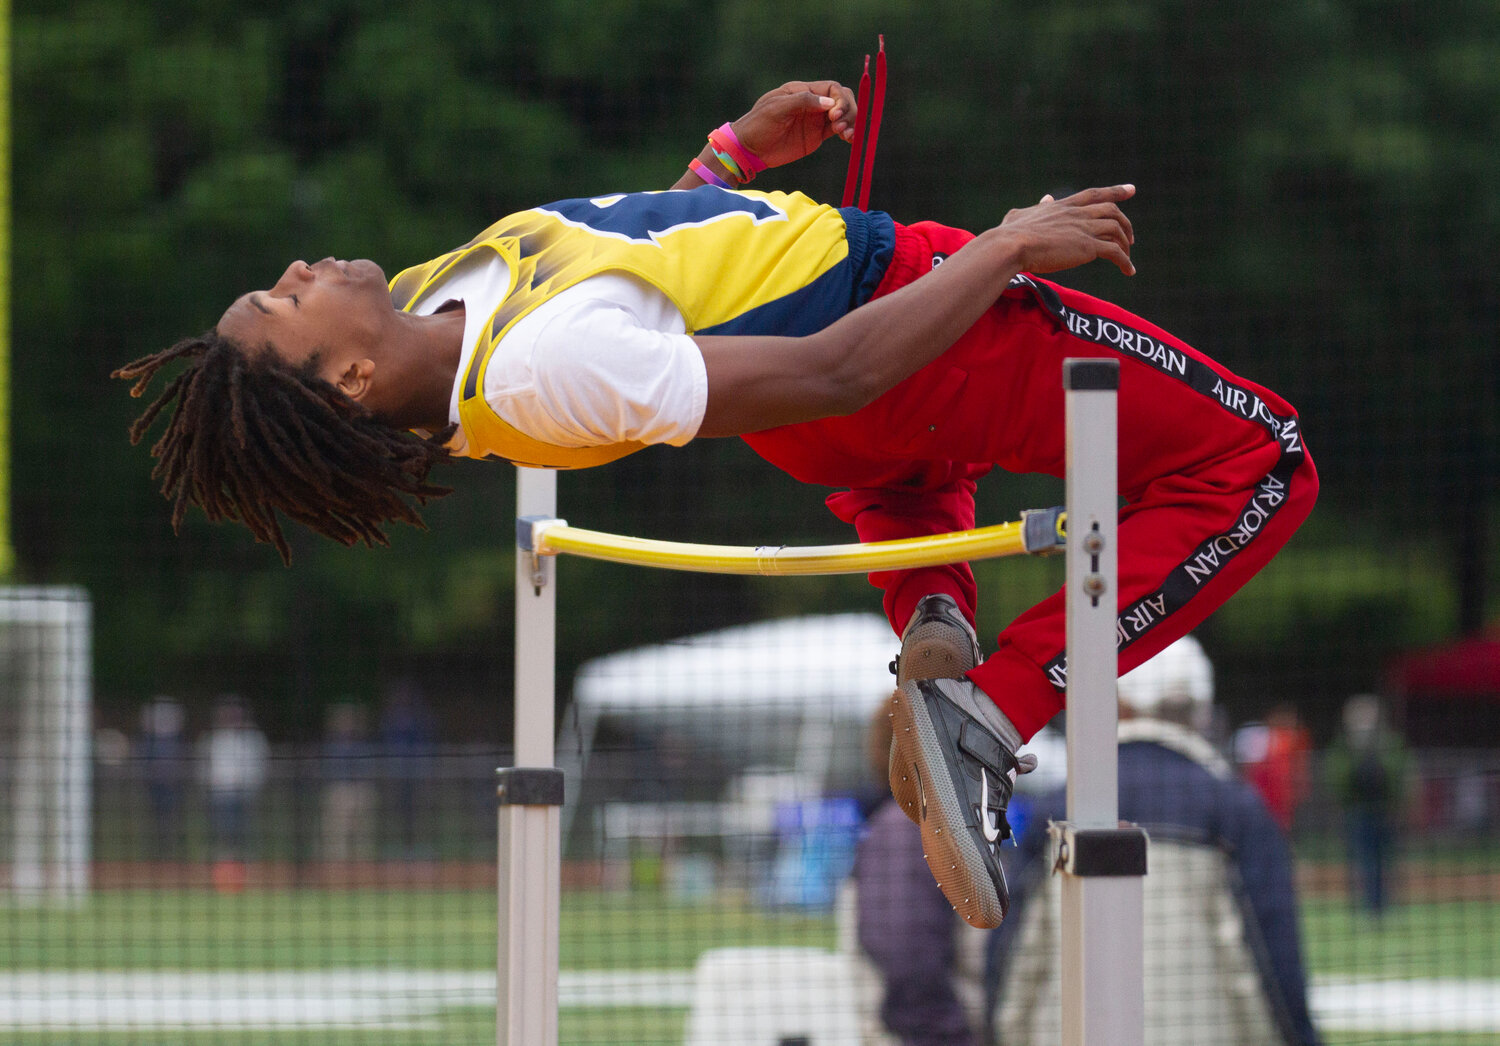 Barrington's Chucky Potter clears the bar with room to spare during the high jump event at the state track meet.